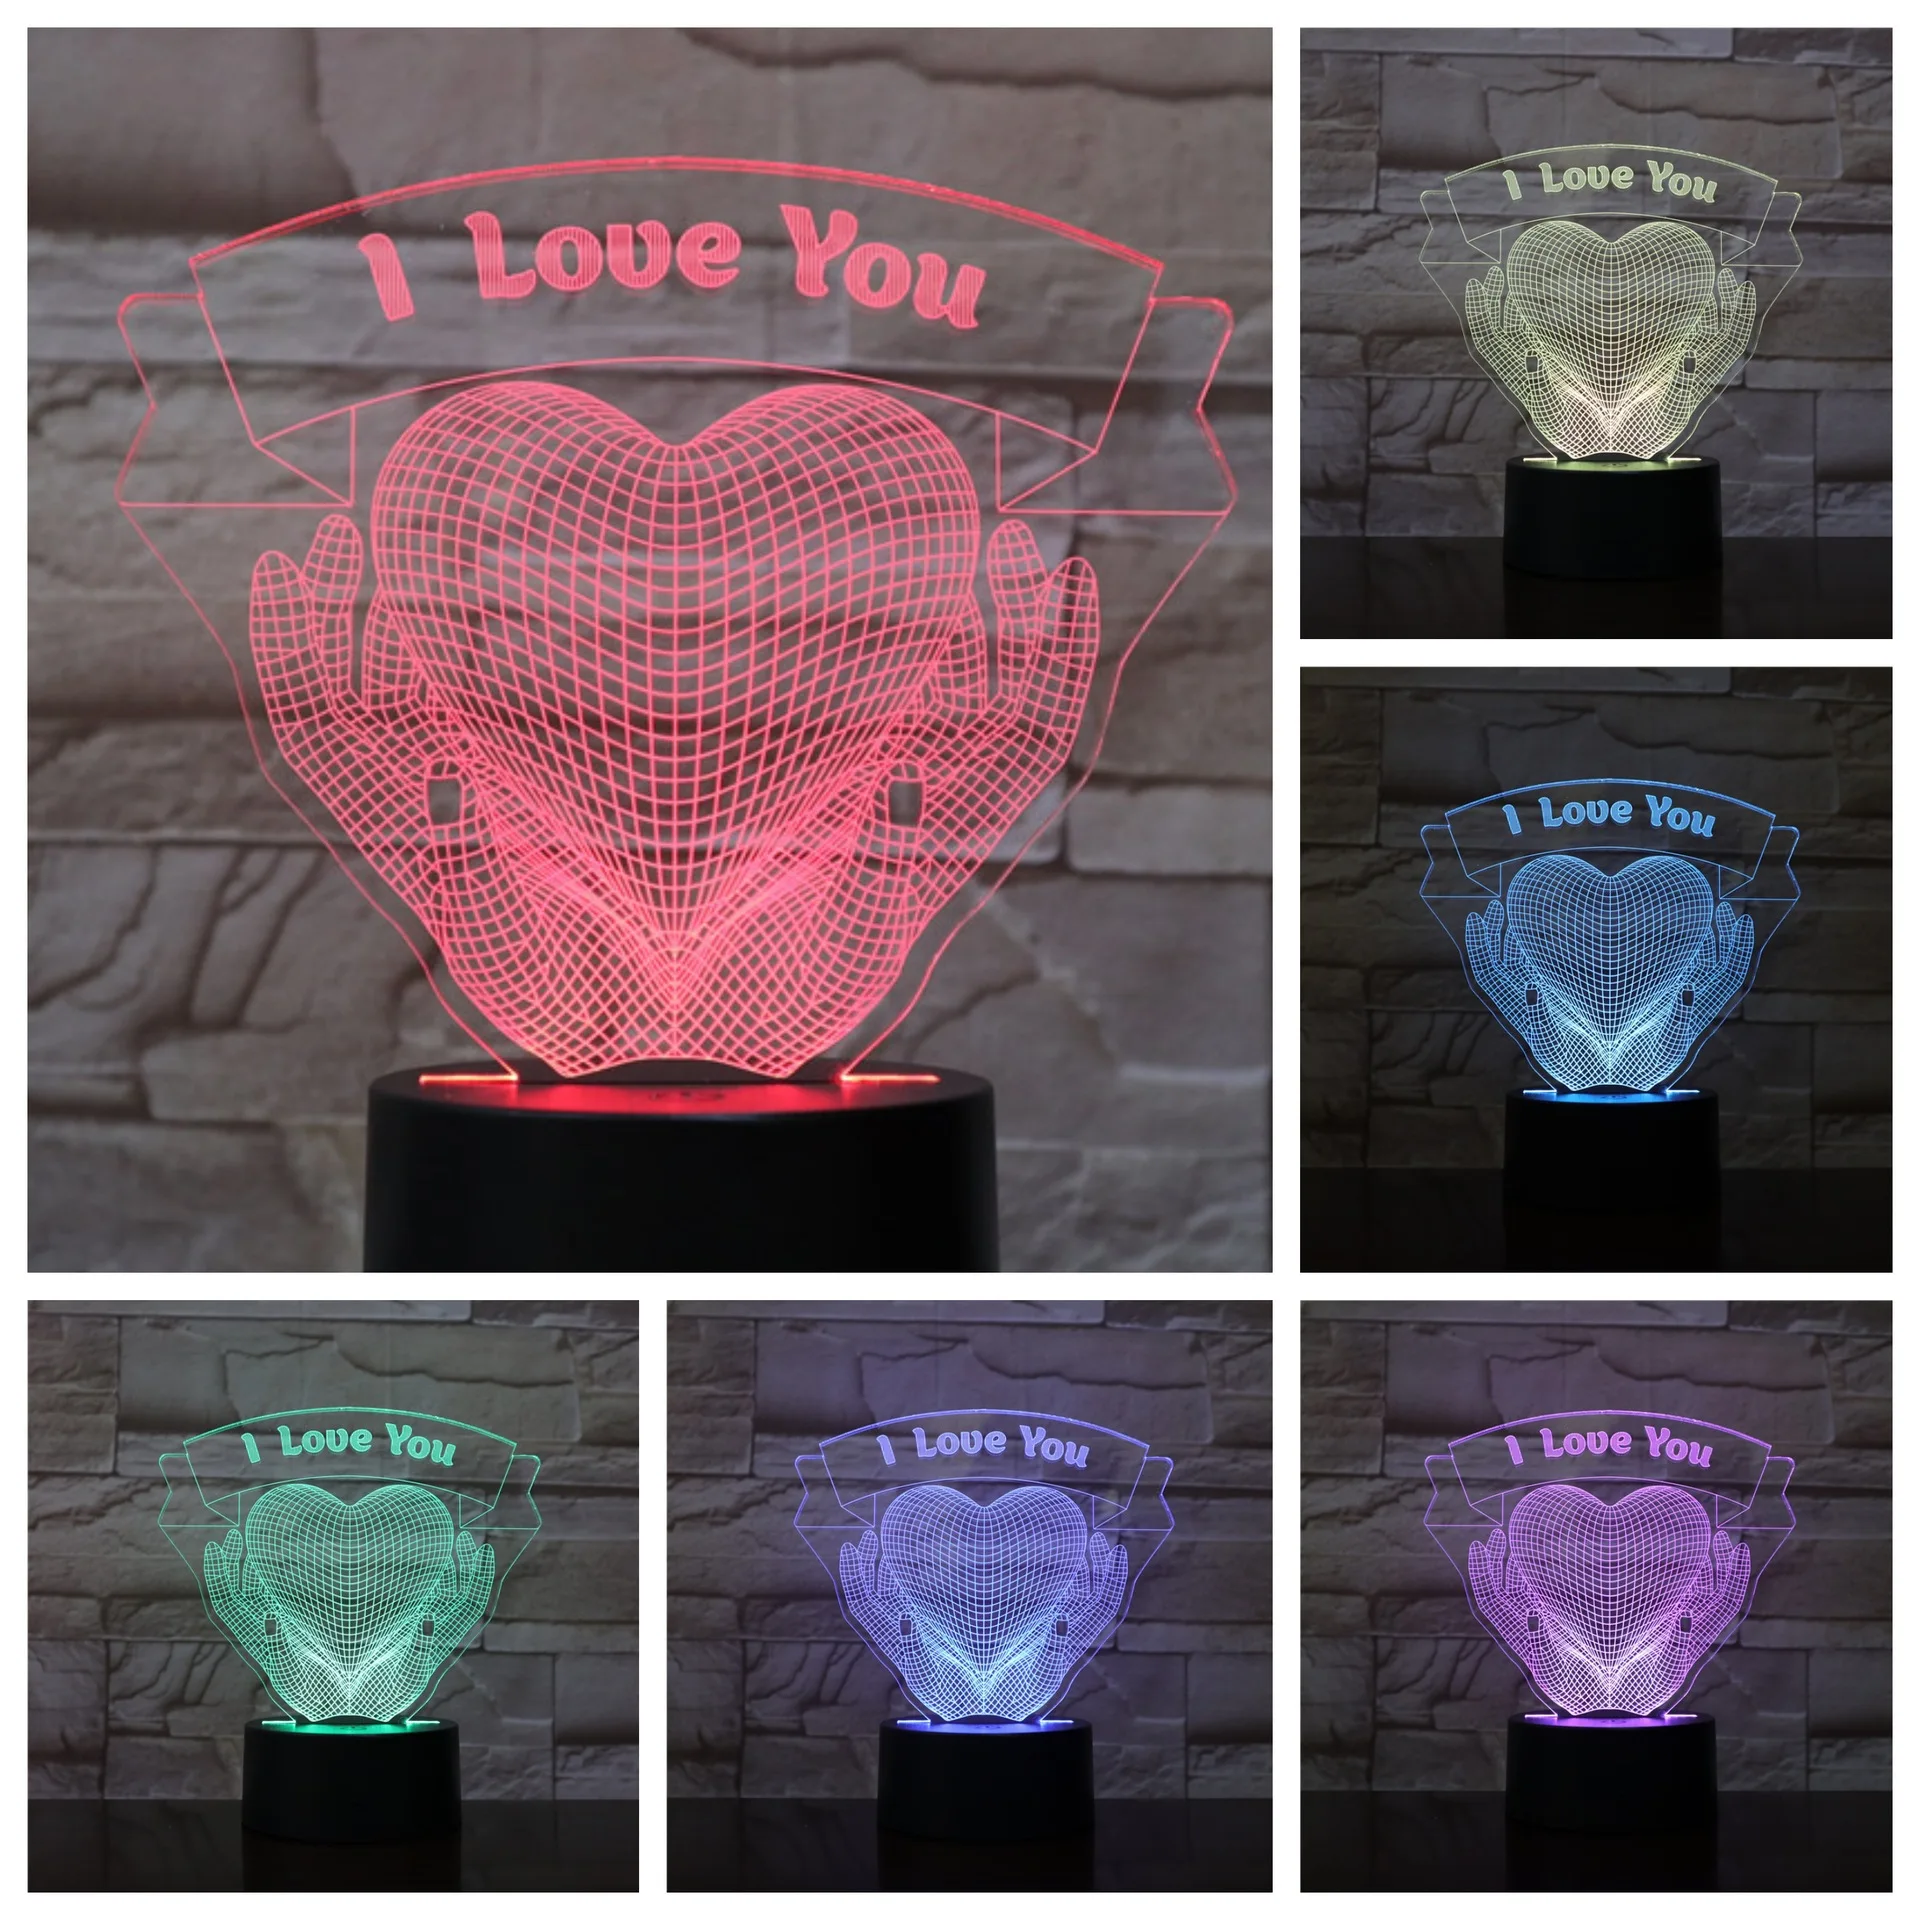 

Valentines Day Gift USB Powered LED 3D lamp illusion night light I love you gadget heart 16 Colors changing Bedroom desk lamps